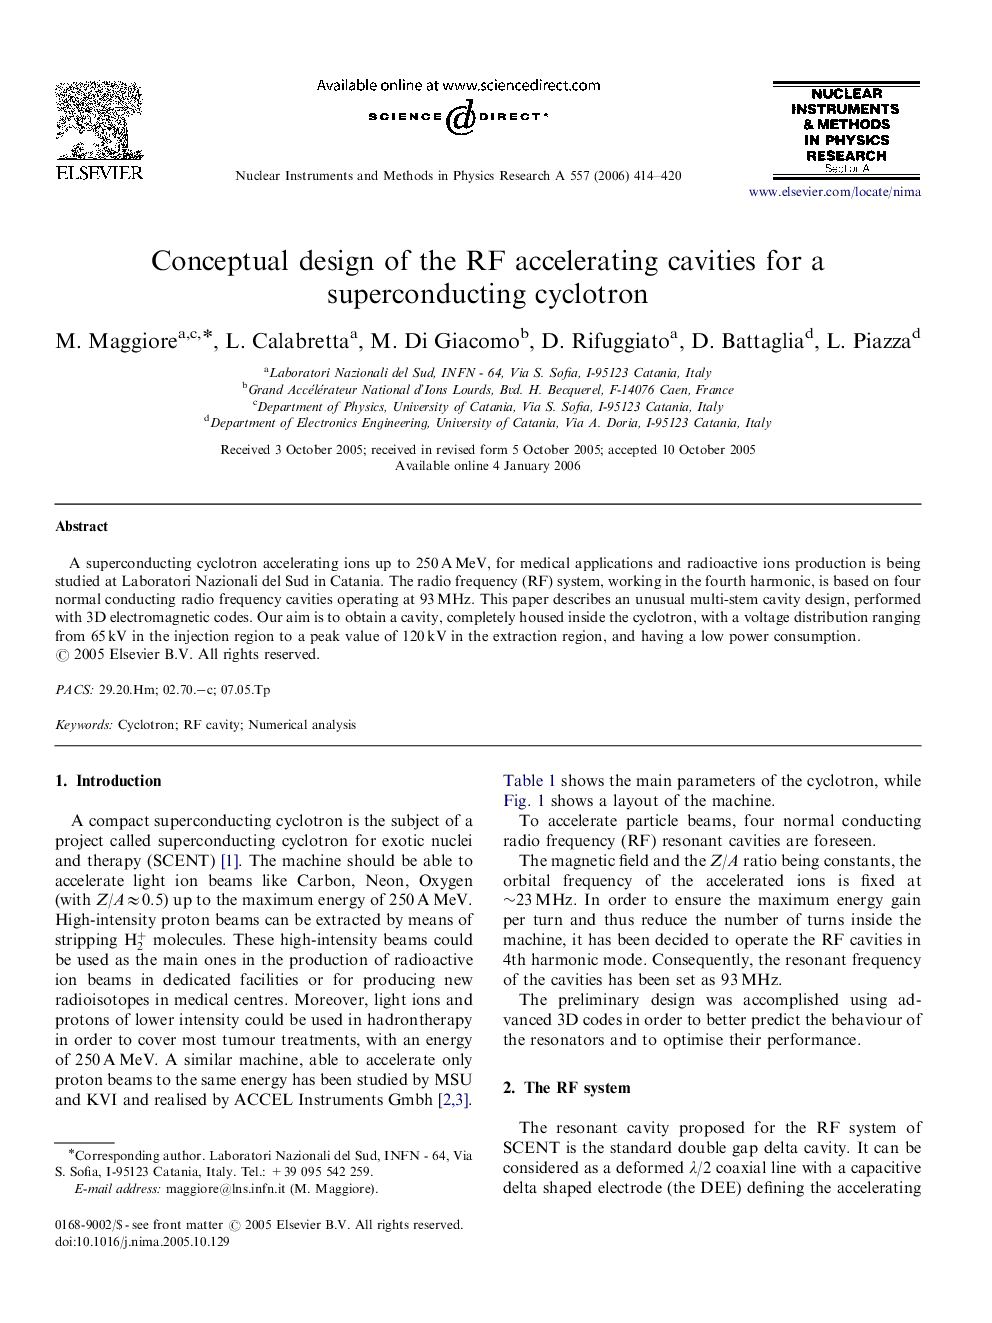 Conceptual design of the RF accelerating cavities for a superconducting cyclotron